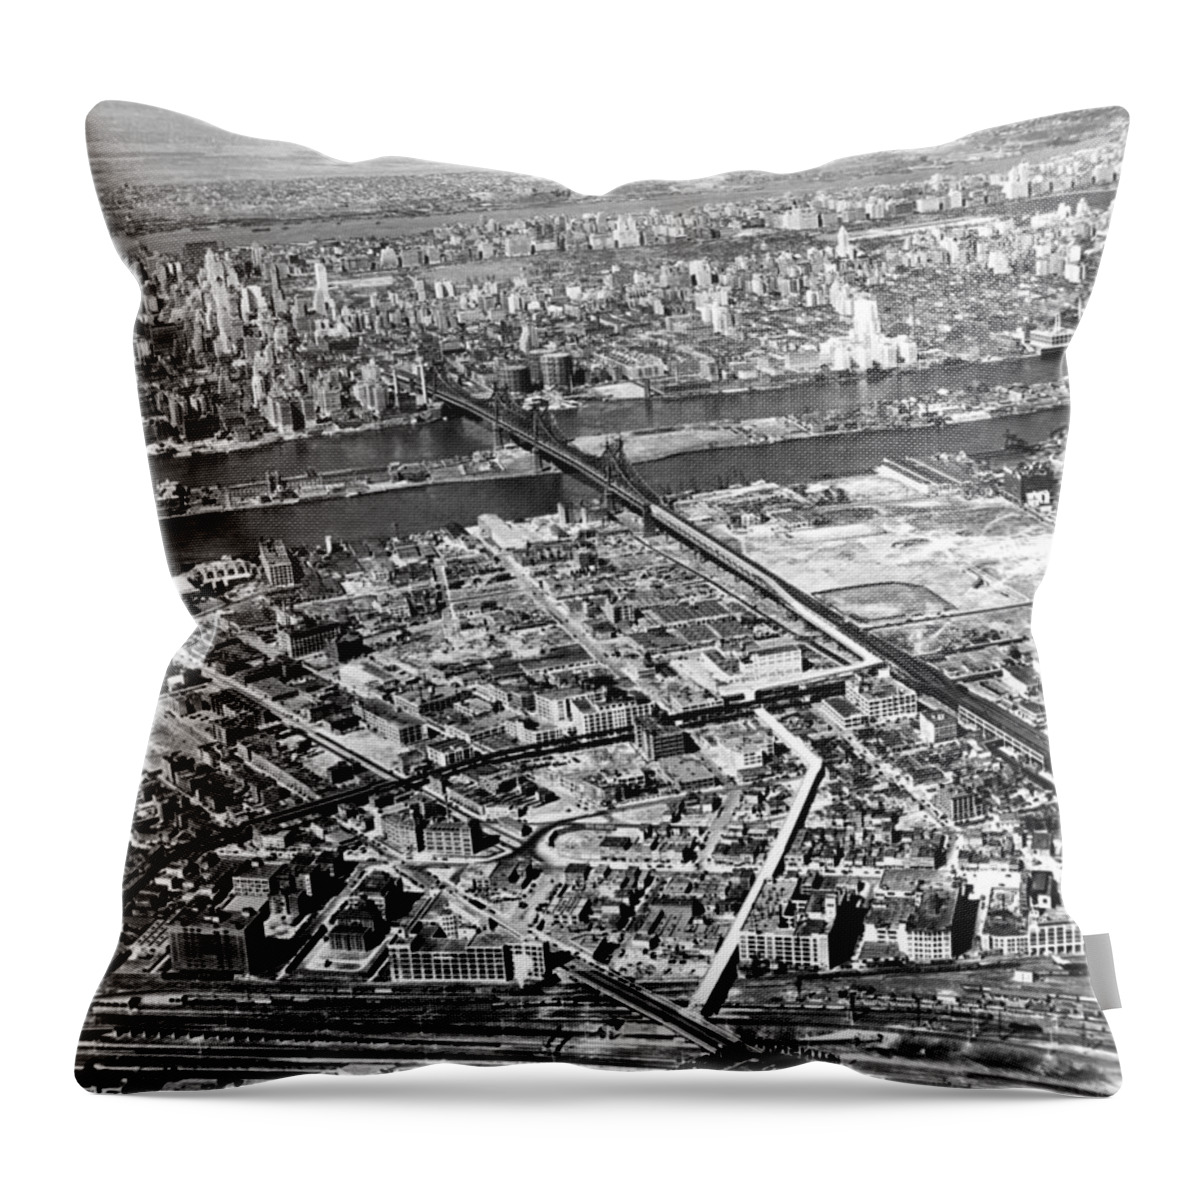 1937 Throw Pillow featuring the photograph New York 1937 Aerial View by Underwood Archives